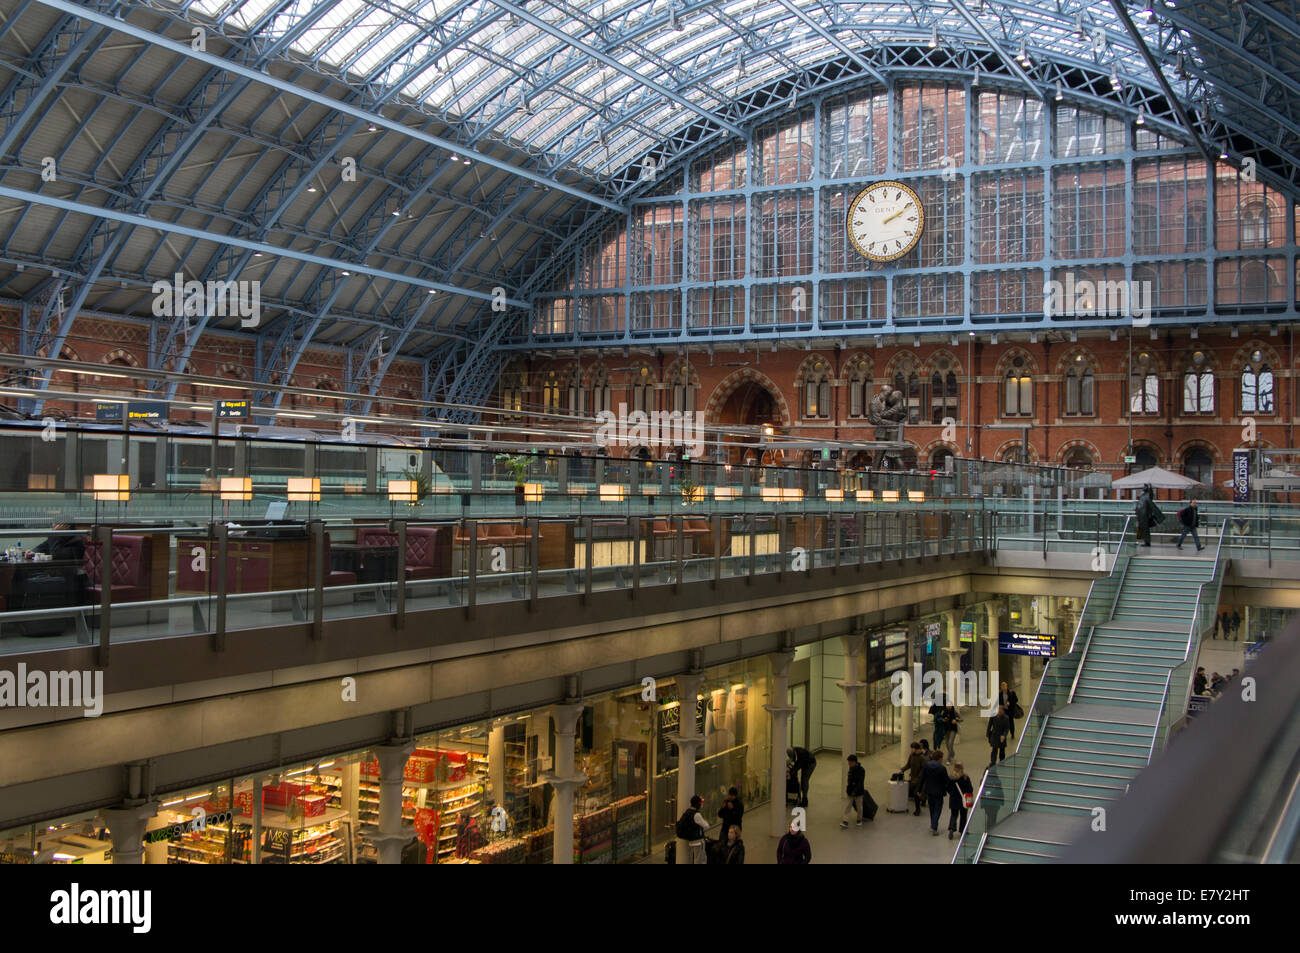 London St Pancras station - interior view of historic Barlow train shed with glass roof & contrasting modern Arcade Concourse shops - England, UK. Stock Photo